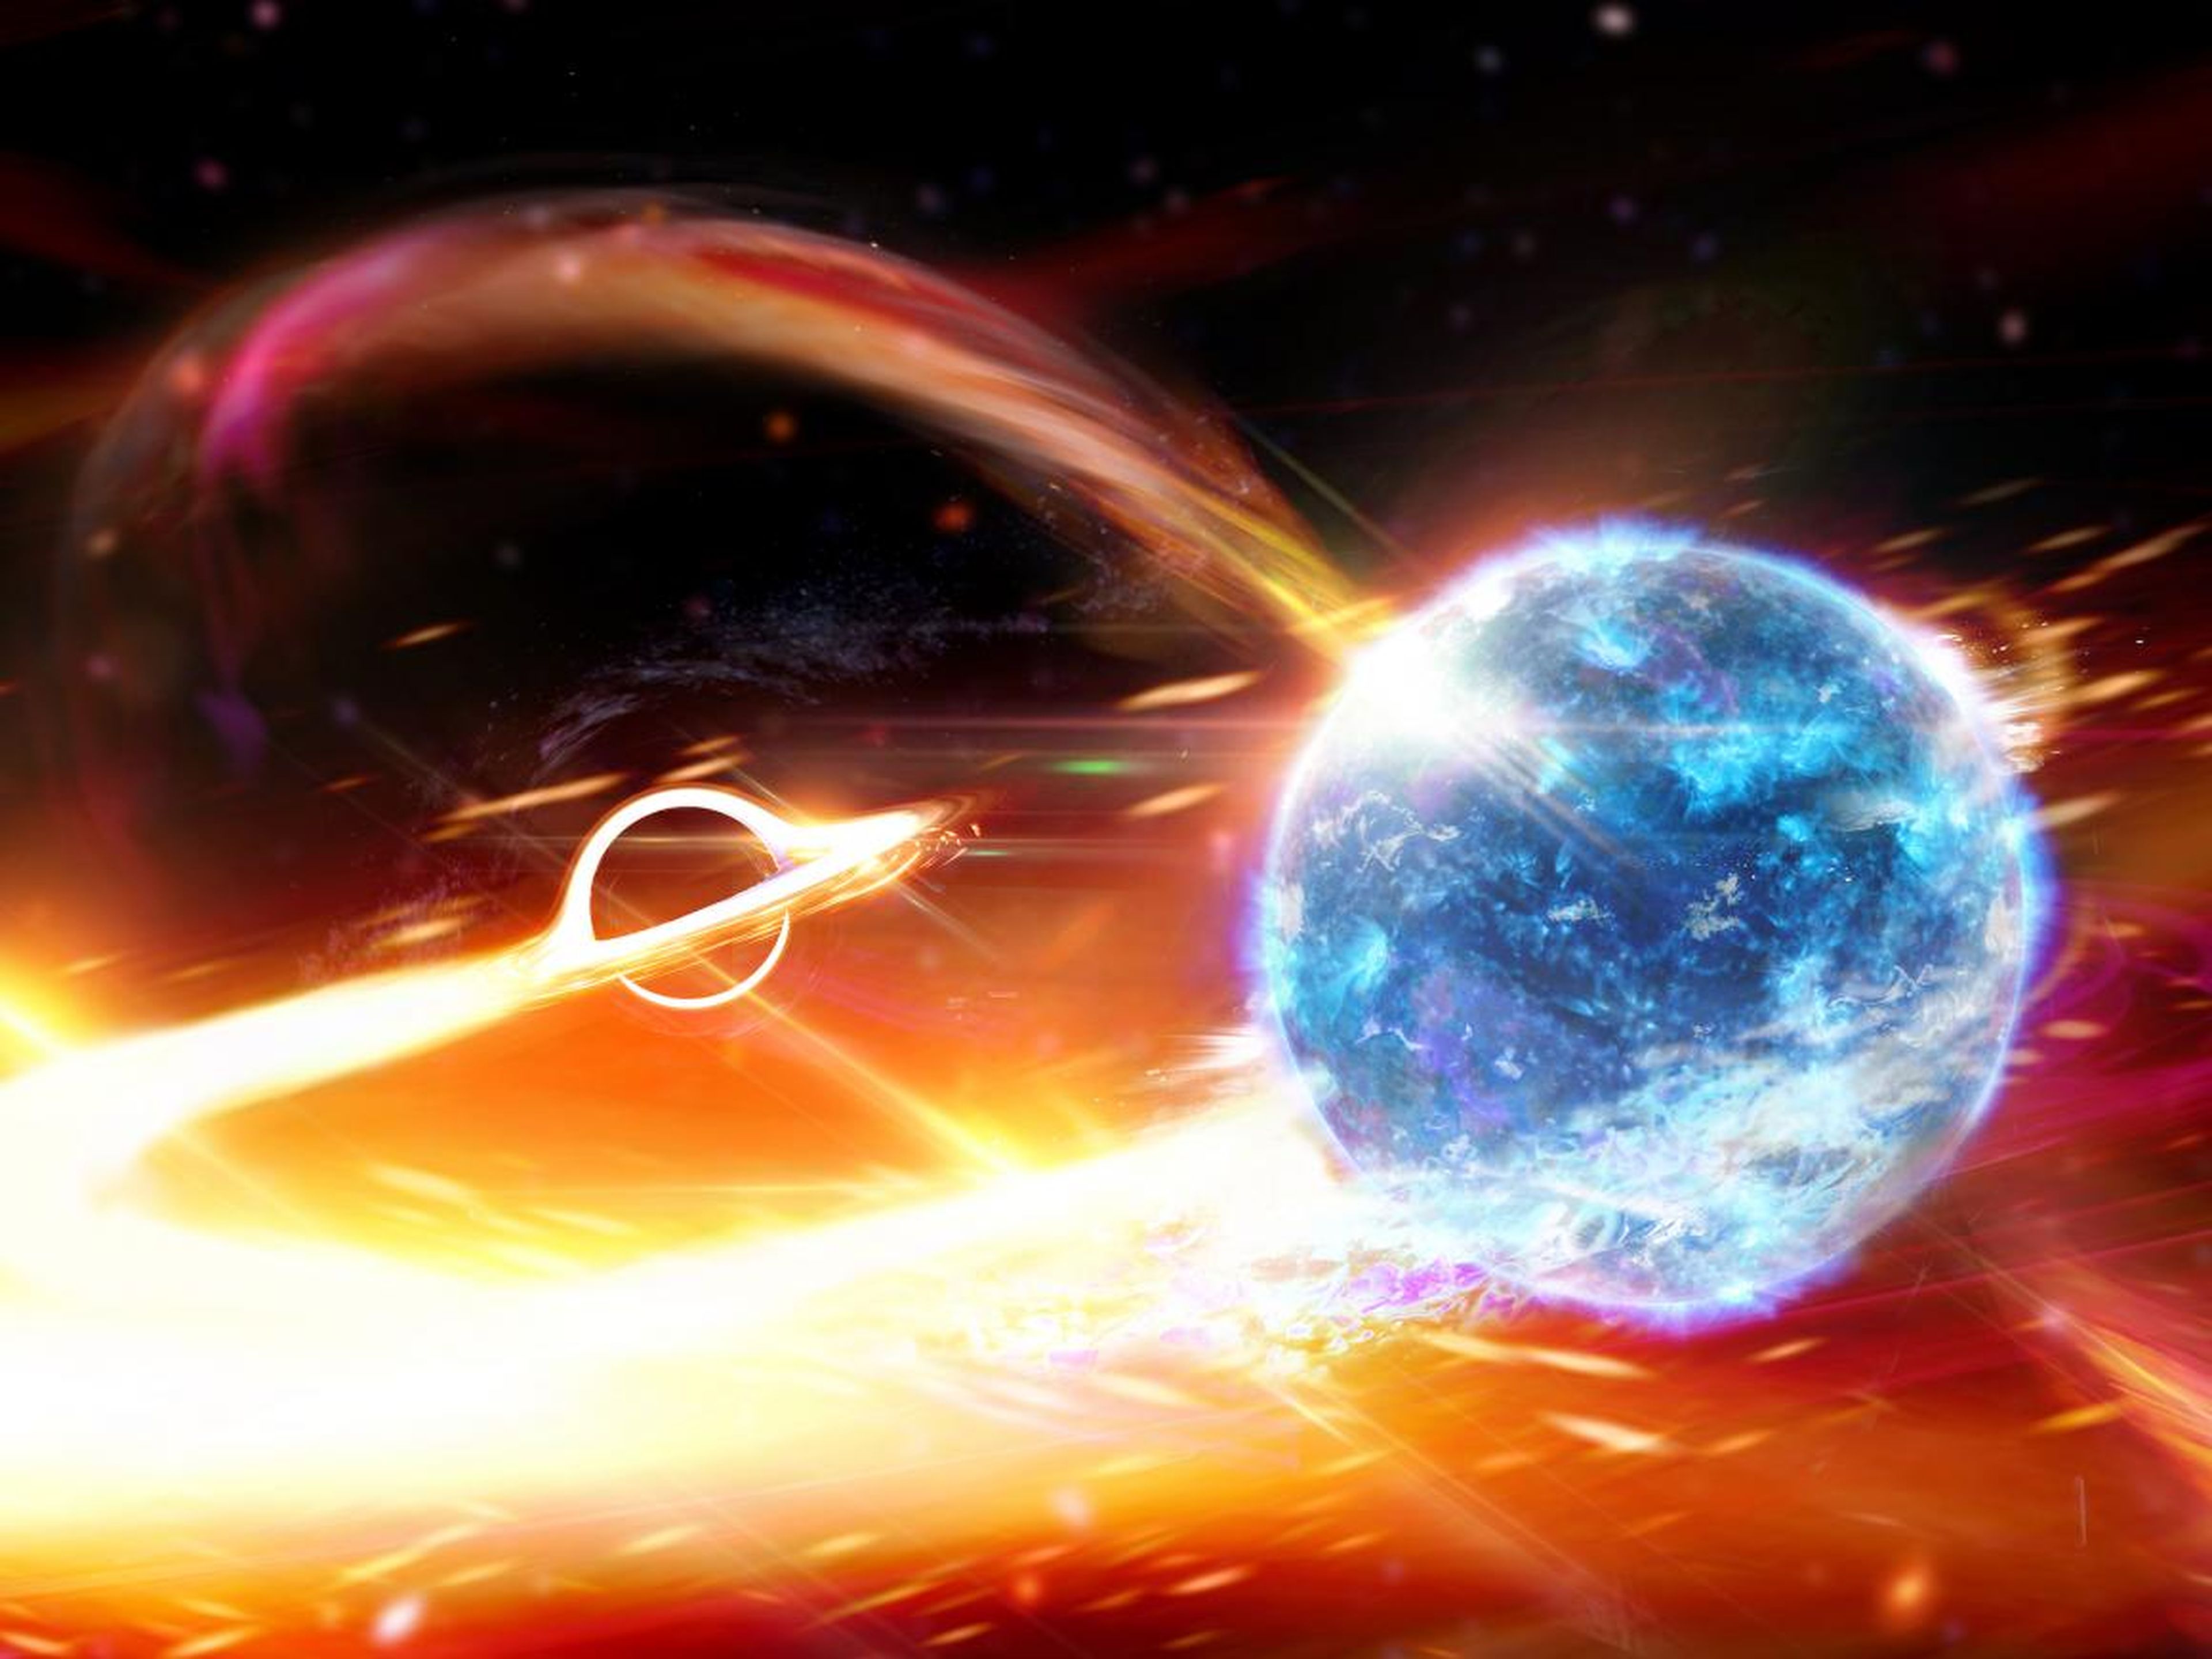 An artist's depiction of a black hole about to swallow a neutron star.